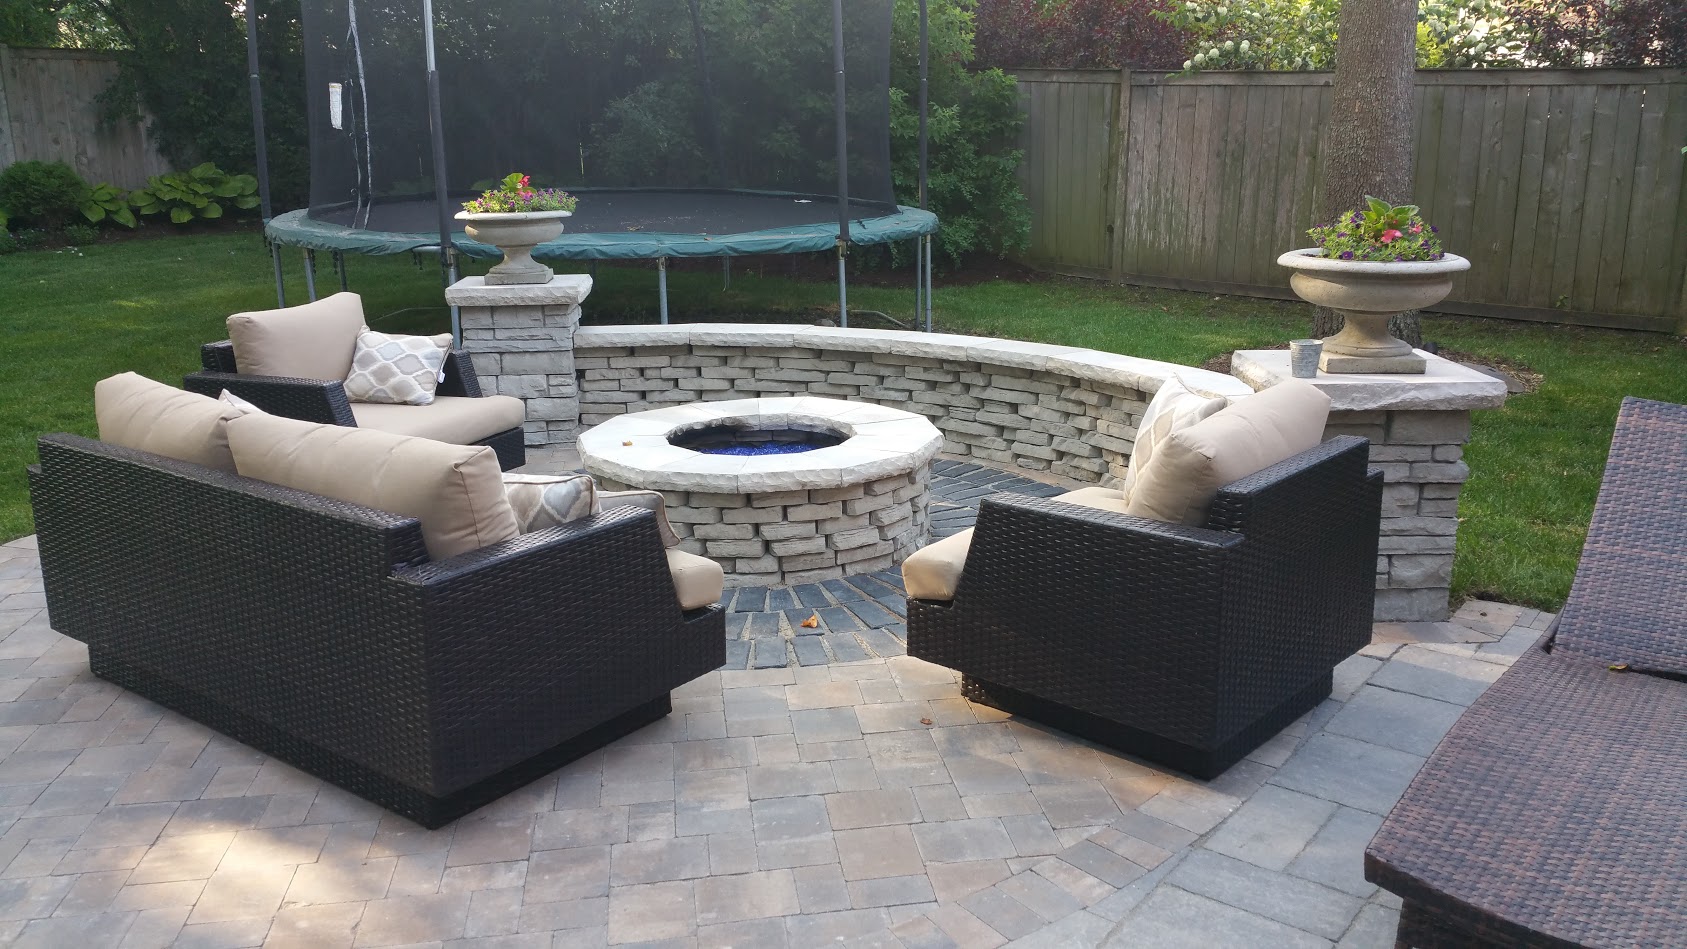 Patio Pavers Wilmette Lake Forest Il, Patio And Landscaping Companies